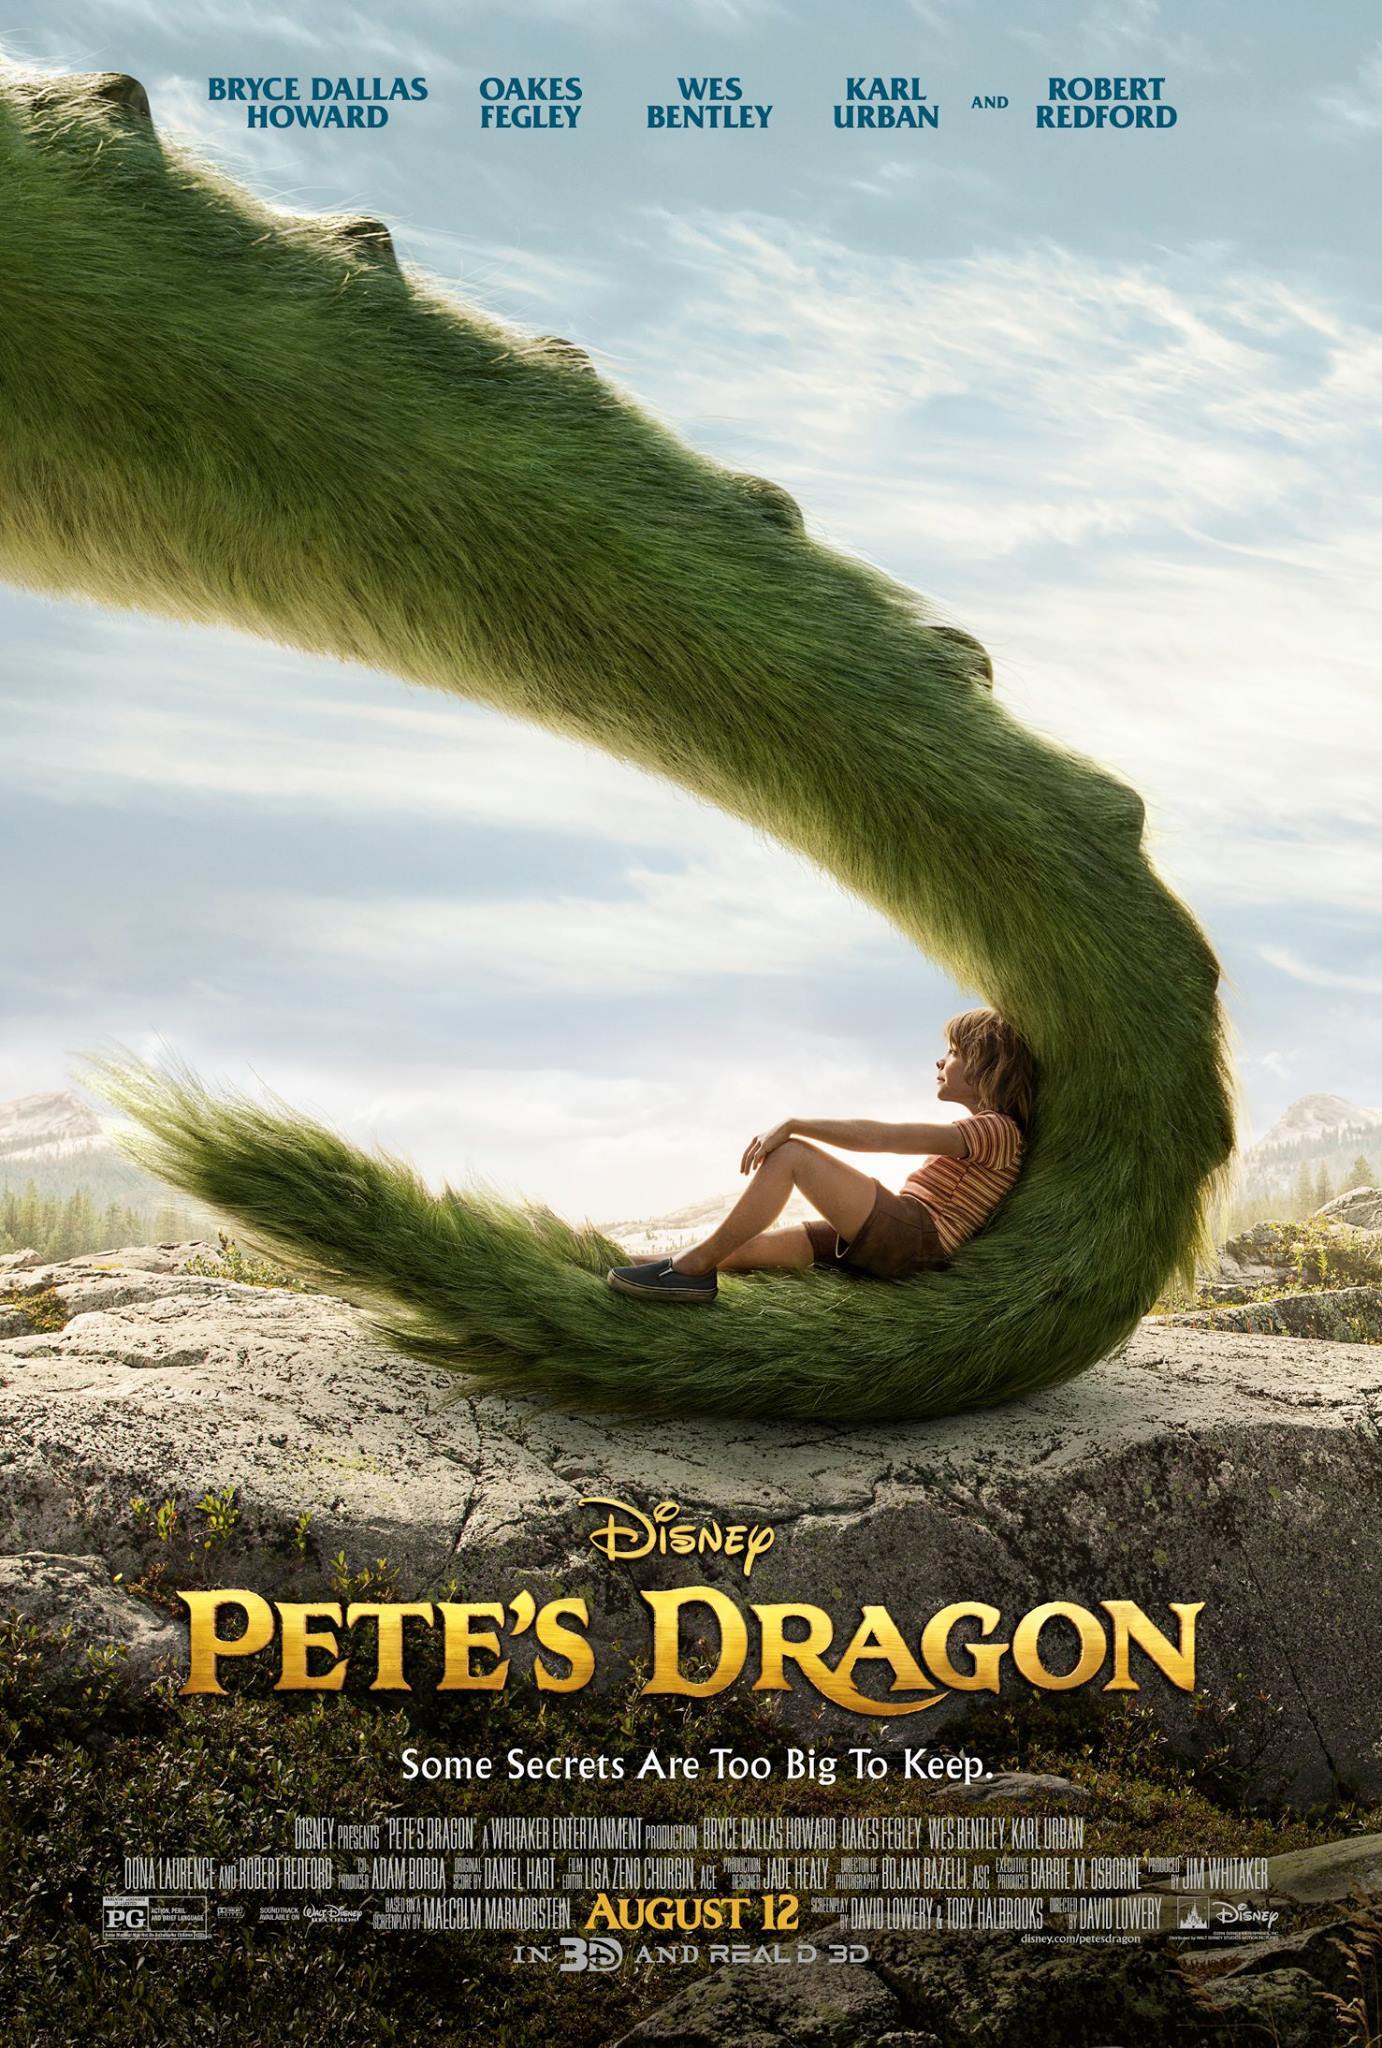 Pete's Dragon Poster 2016 wallpaper 2018 in Movies